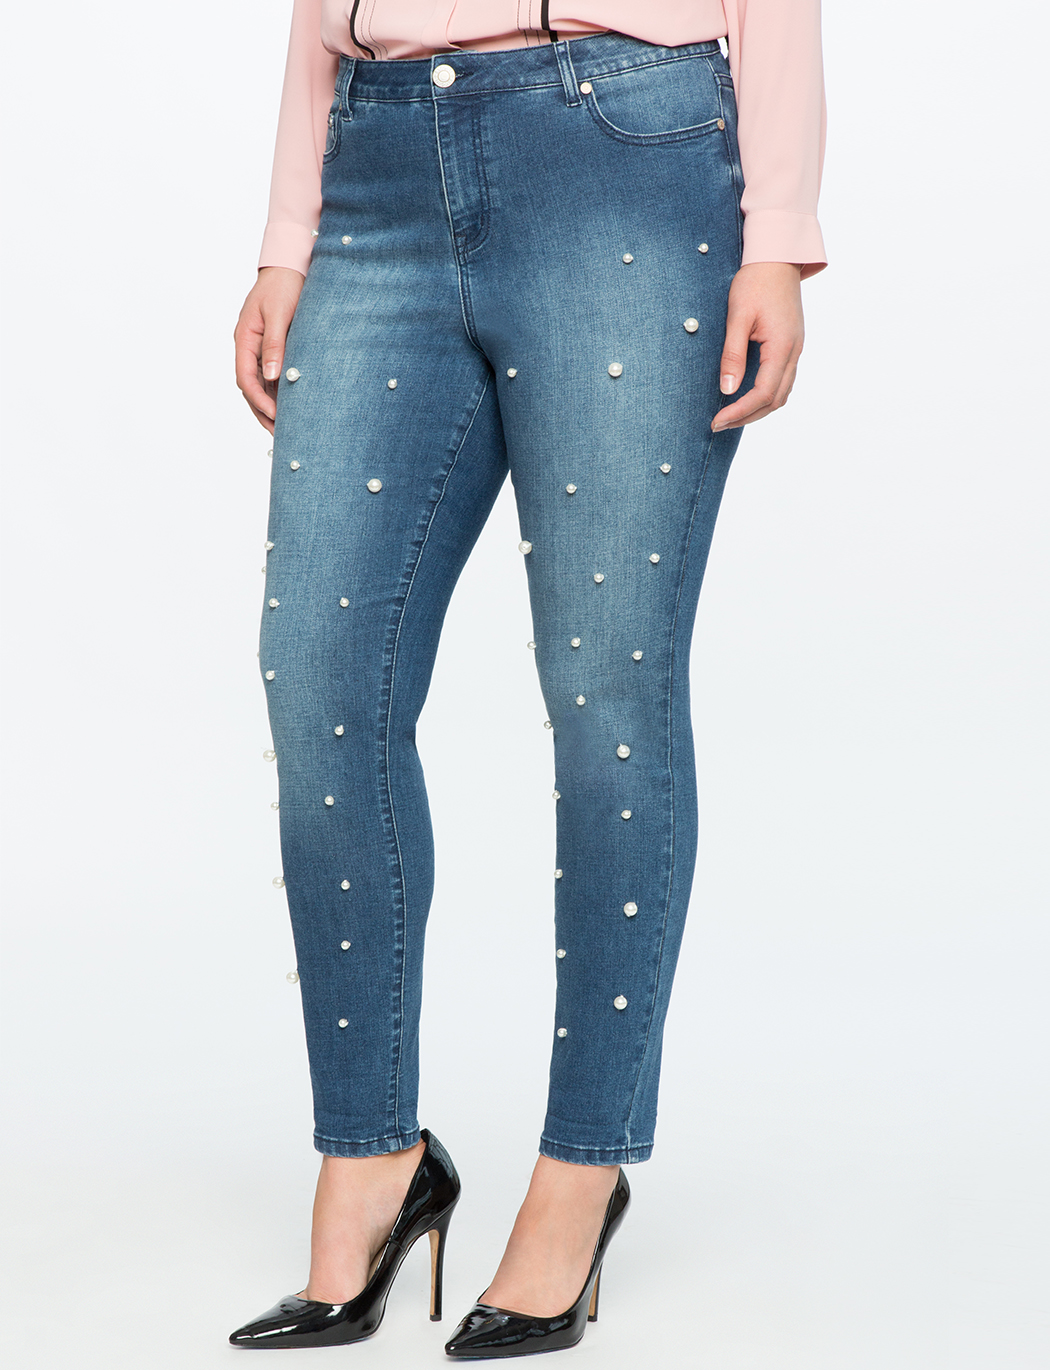 Pearl Embellished Trend on Eloquii Jeans